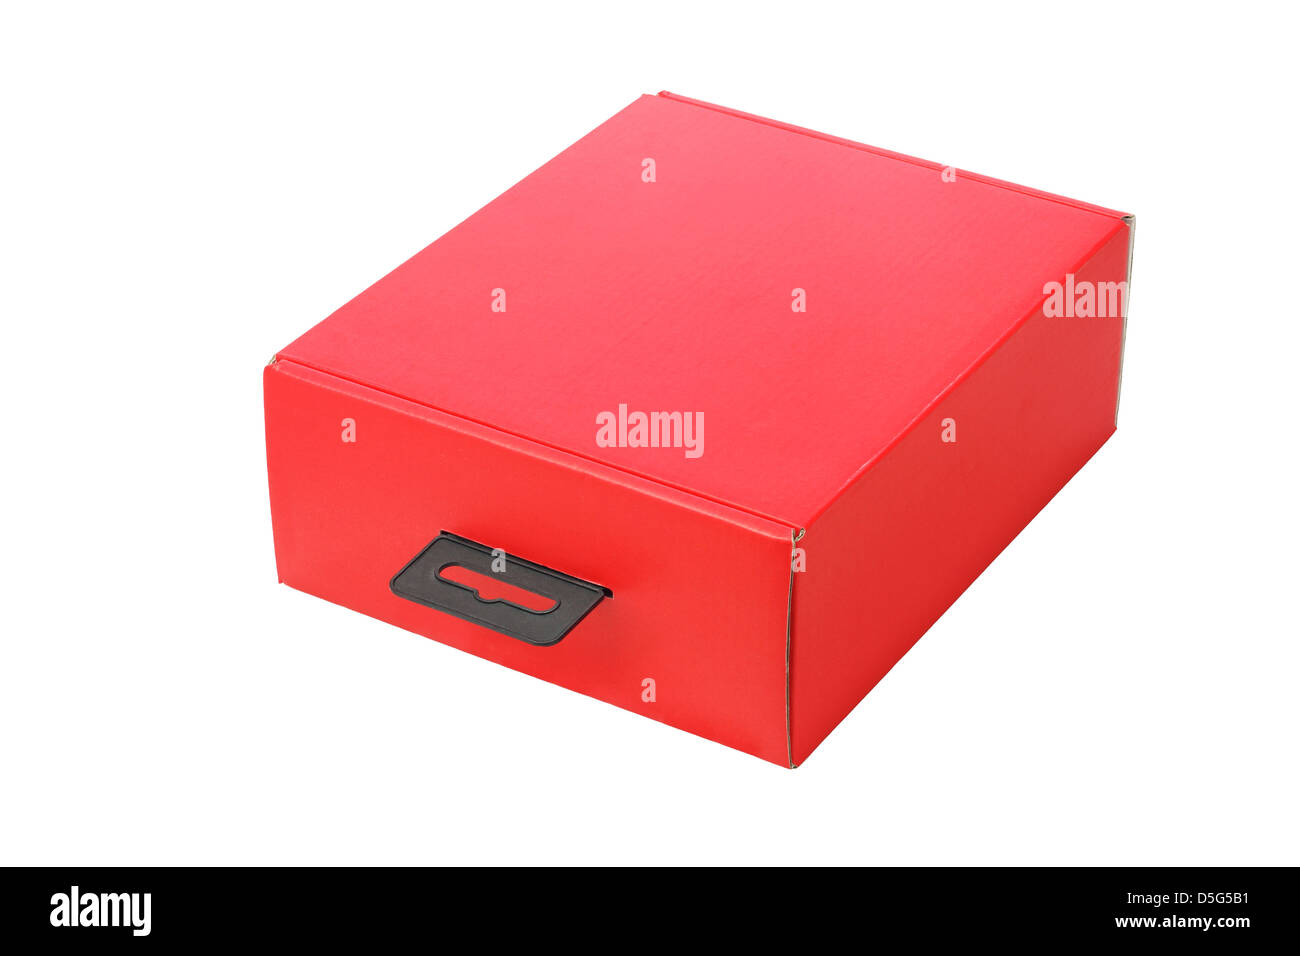 Red Box With Plastic Handle on White Background Stock Photo